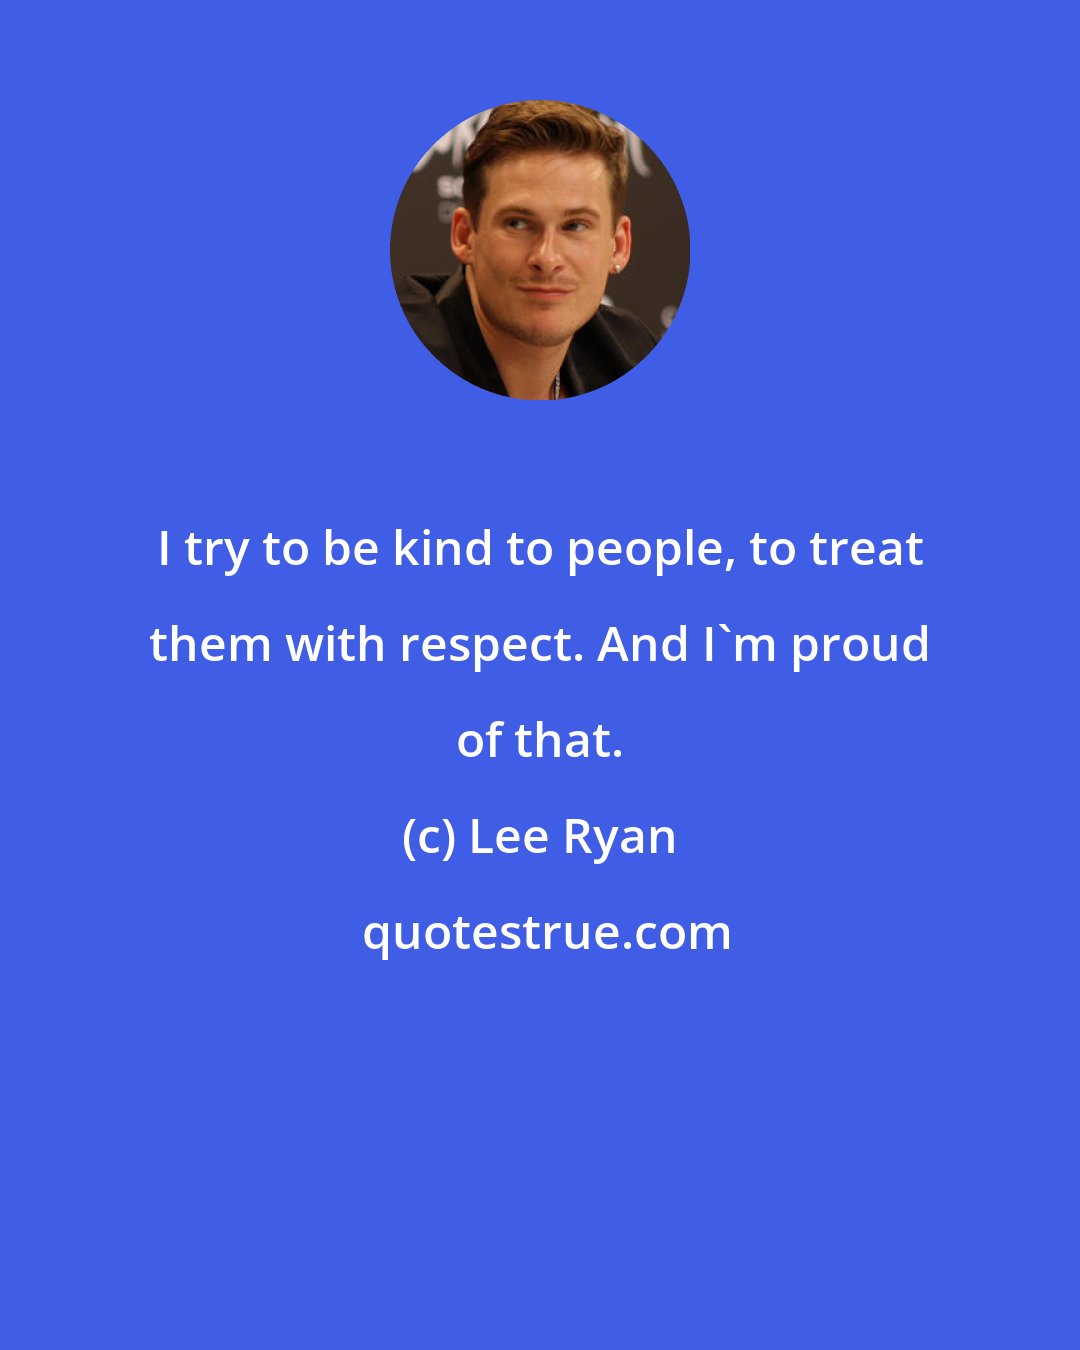 Lee Ryan: I try to be kind to people, to treat them with respect. And I'm proud of that.